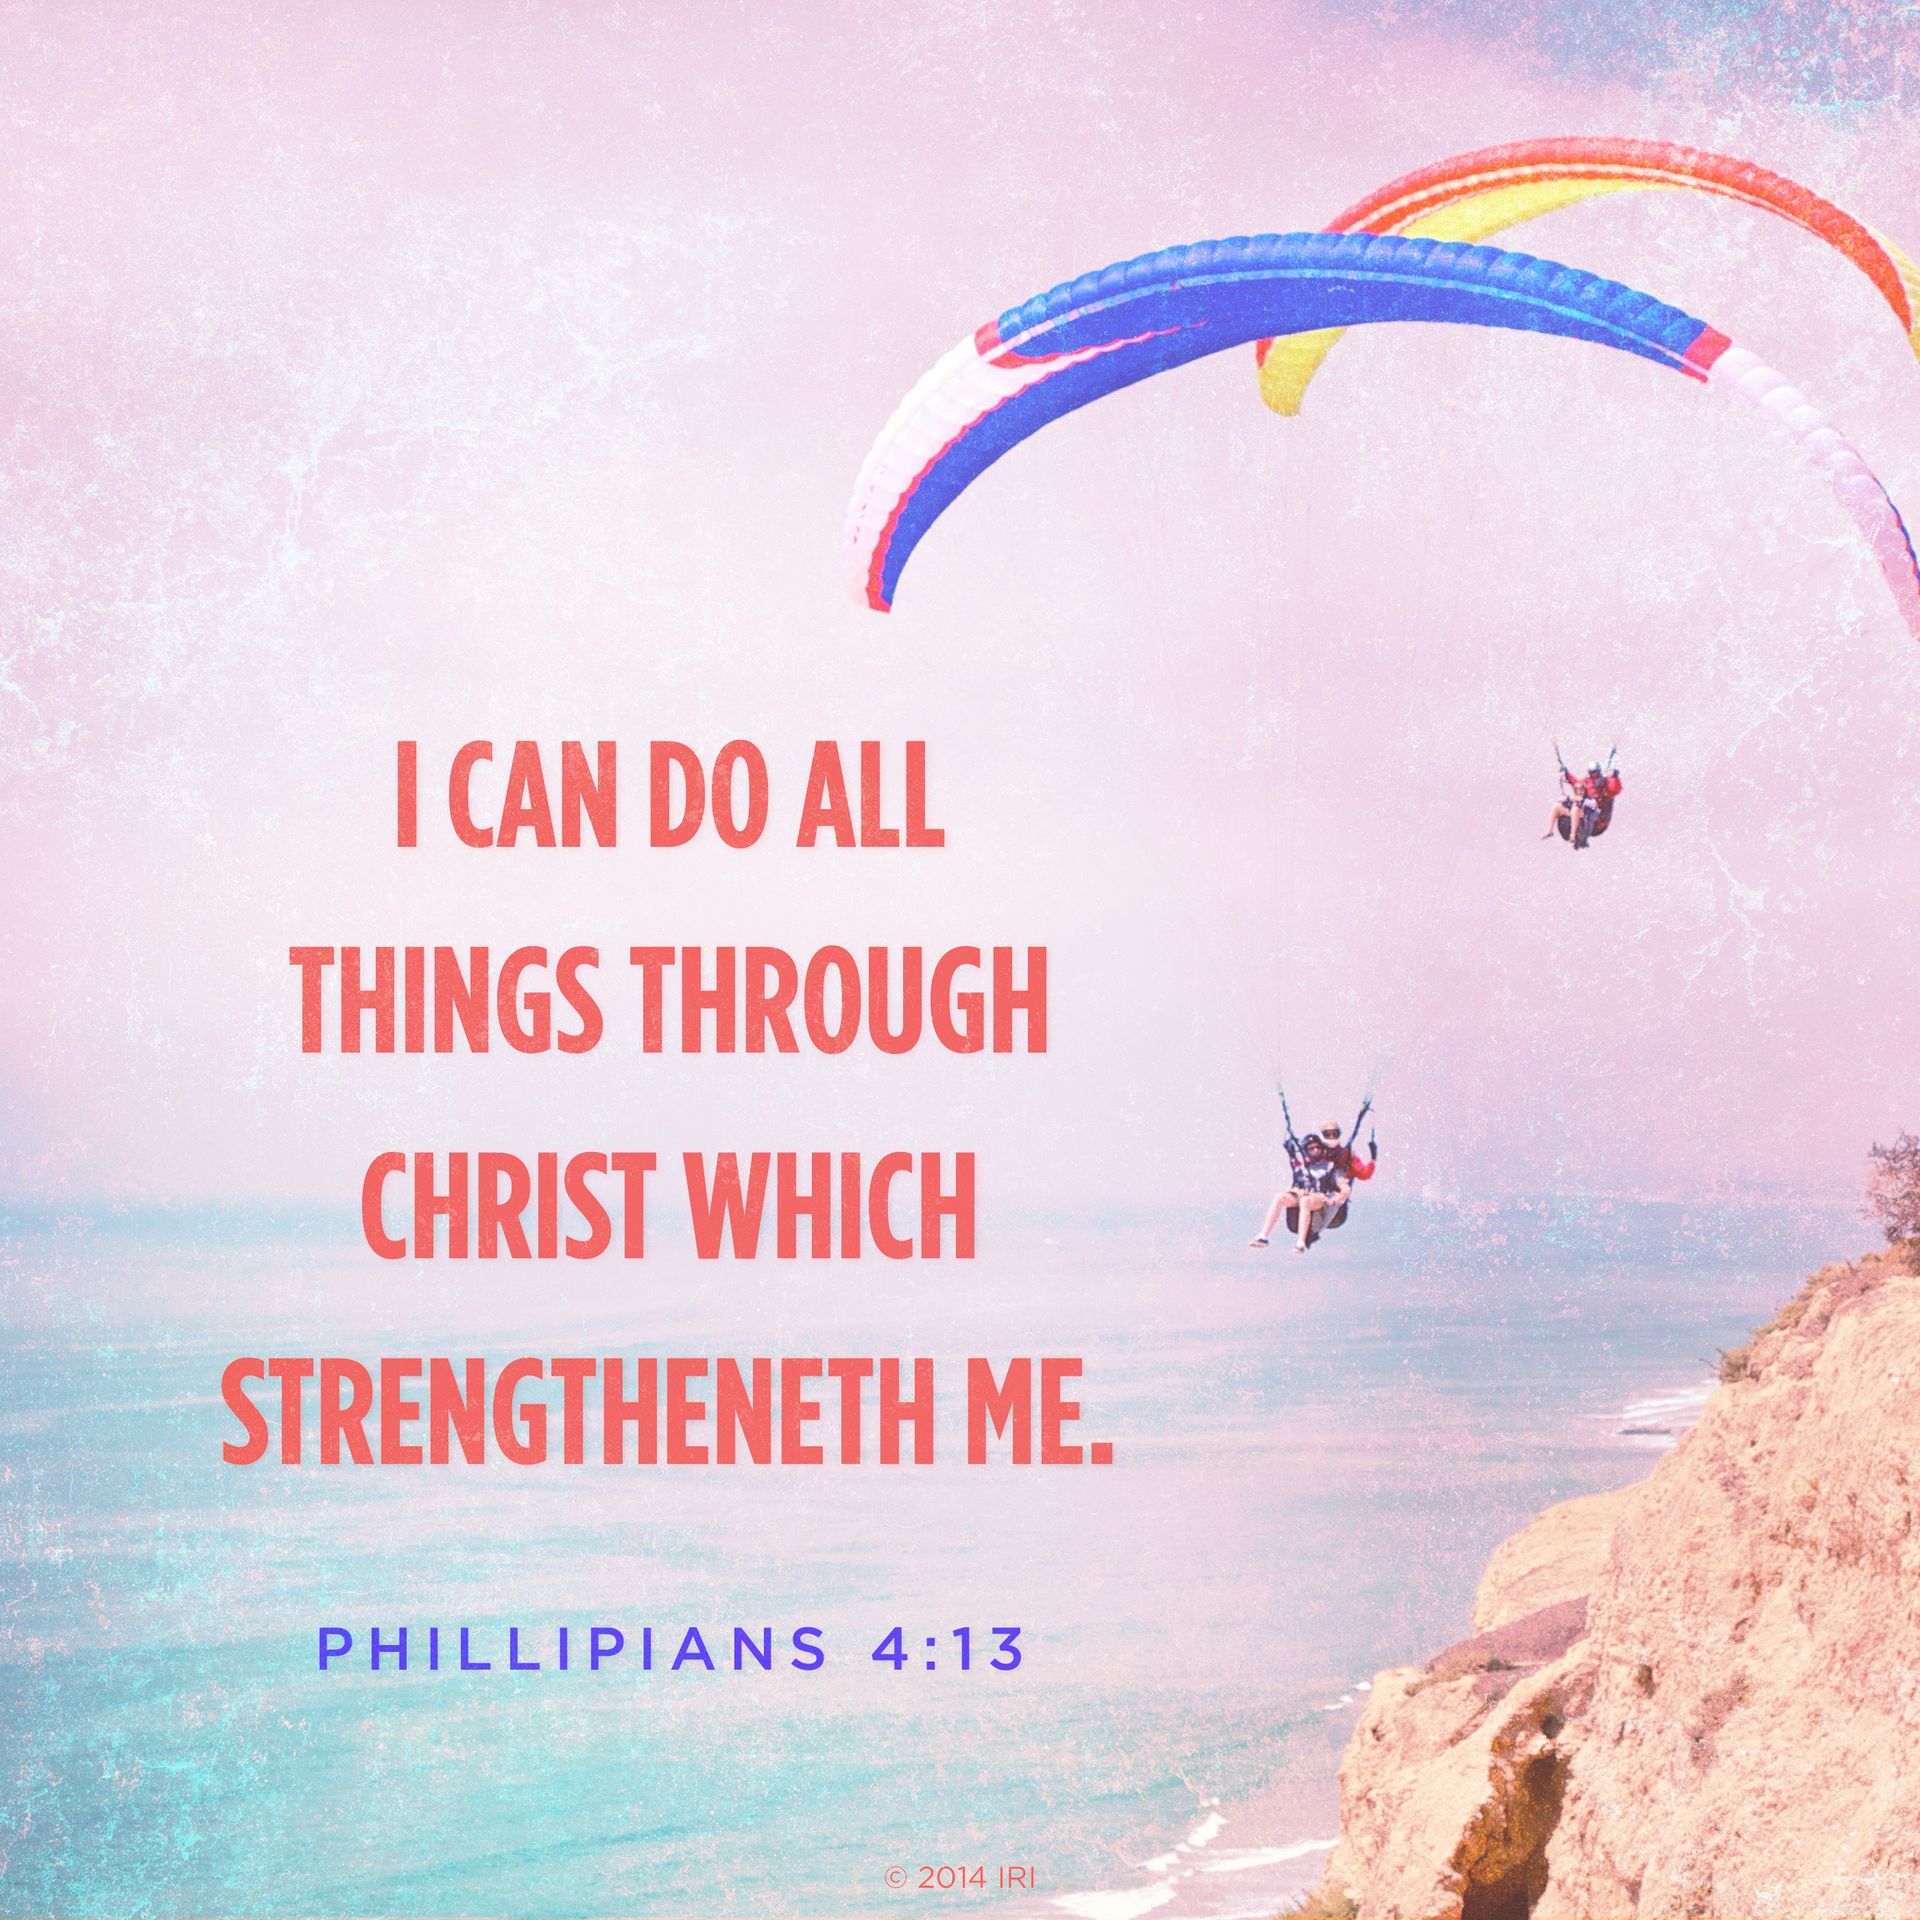 “I can do all things through Christ which strengtheneth me.”—Philippians 4:13